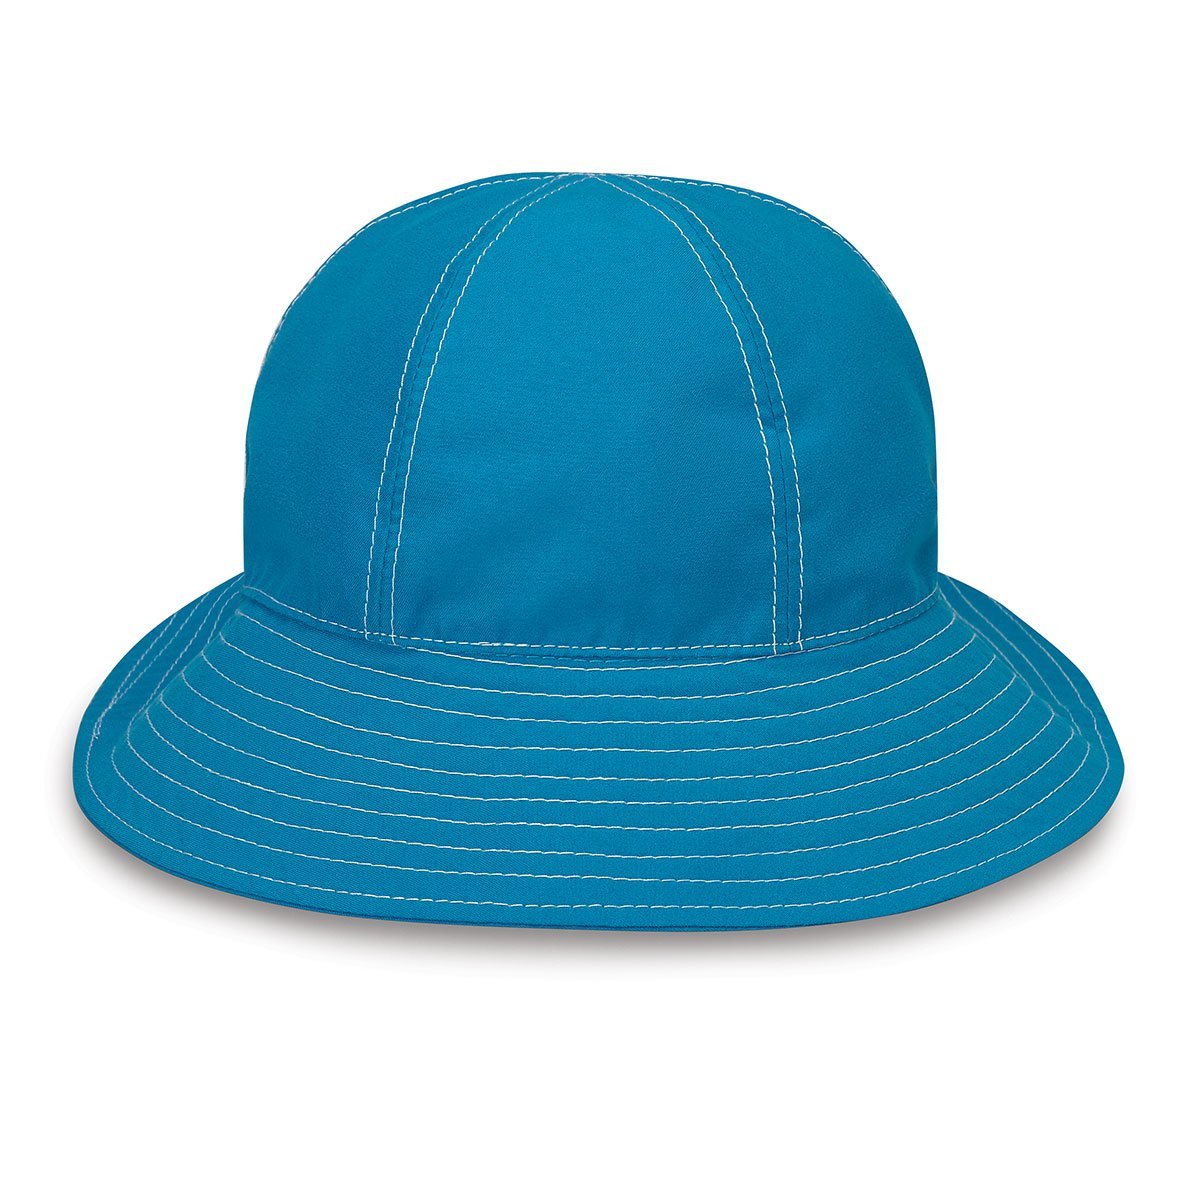 Featuring UPF Packable Wide Brim Kid's Platypus Bucket Style Sun Hat with Chinstrap in Aqua from Wallaroo